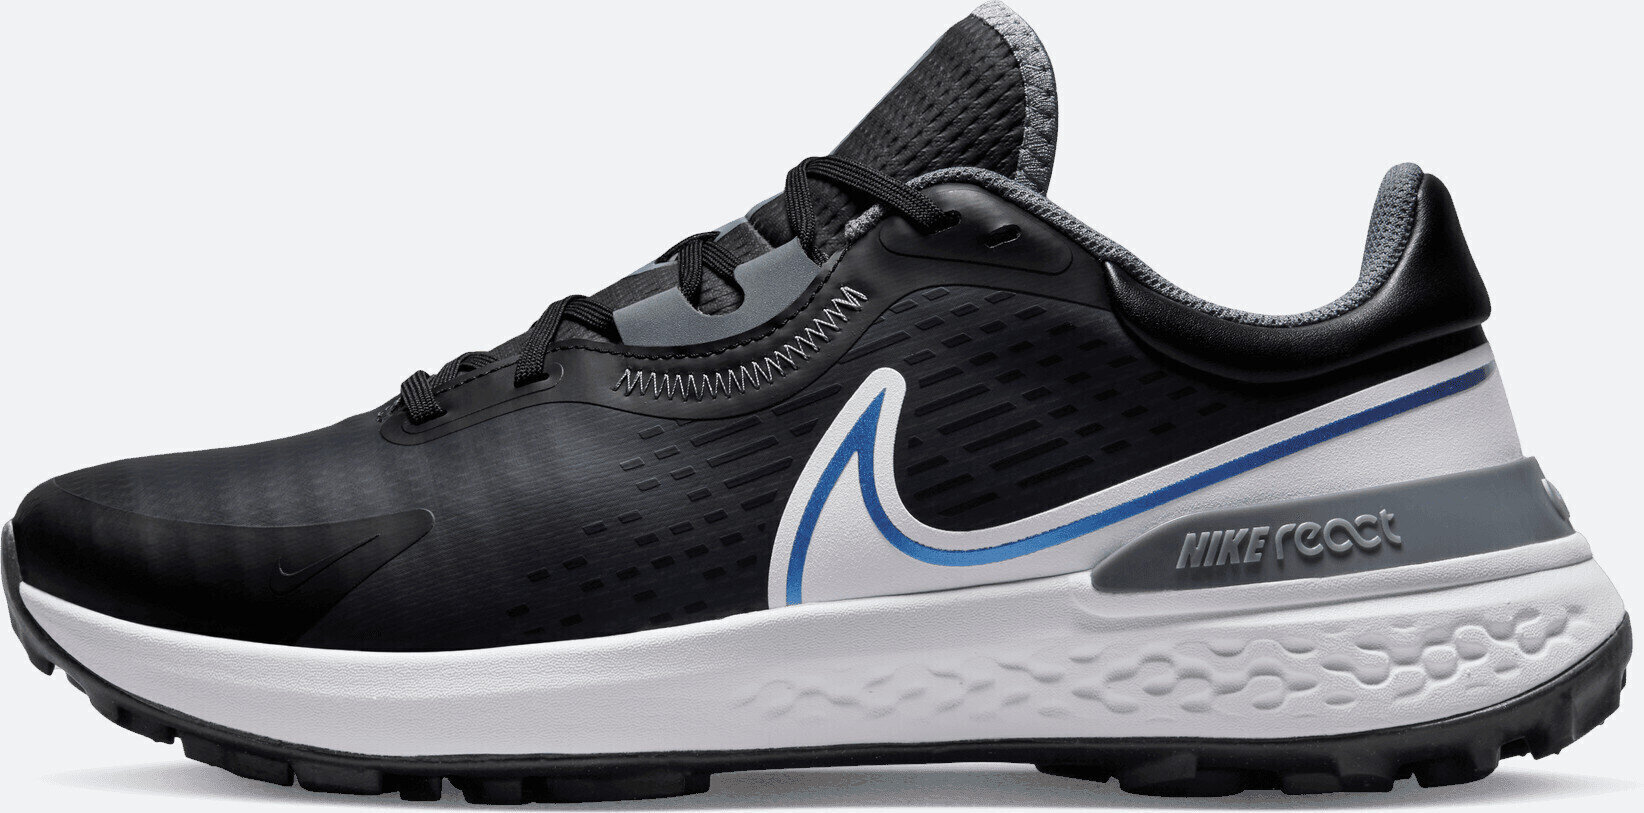 Chaussures de golf pour hommes Nike Infinity Pro 2 Mens Golf Shoes Anthracite/Black/White/Cool Grey 45,5